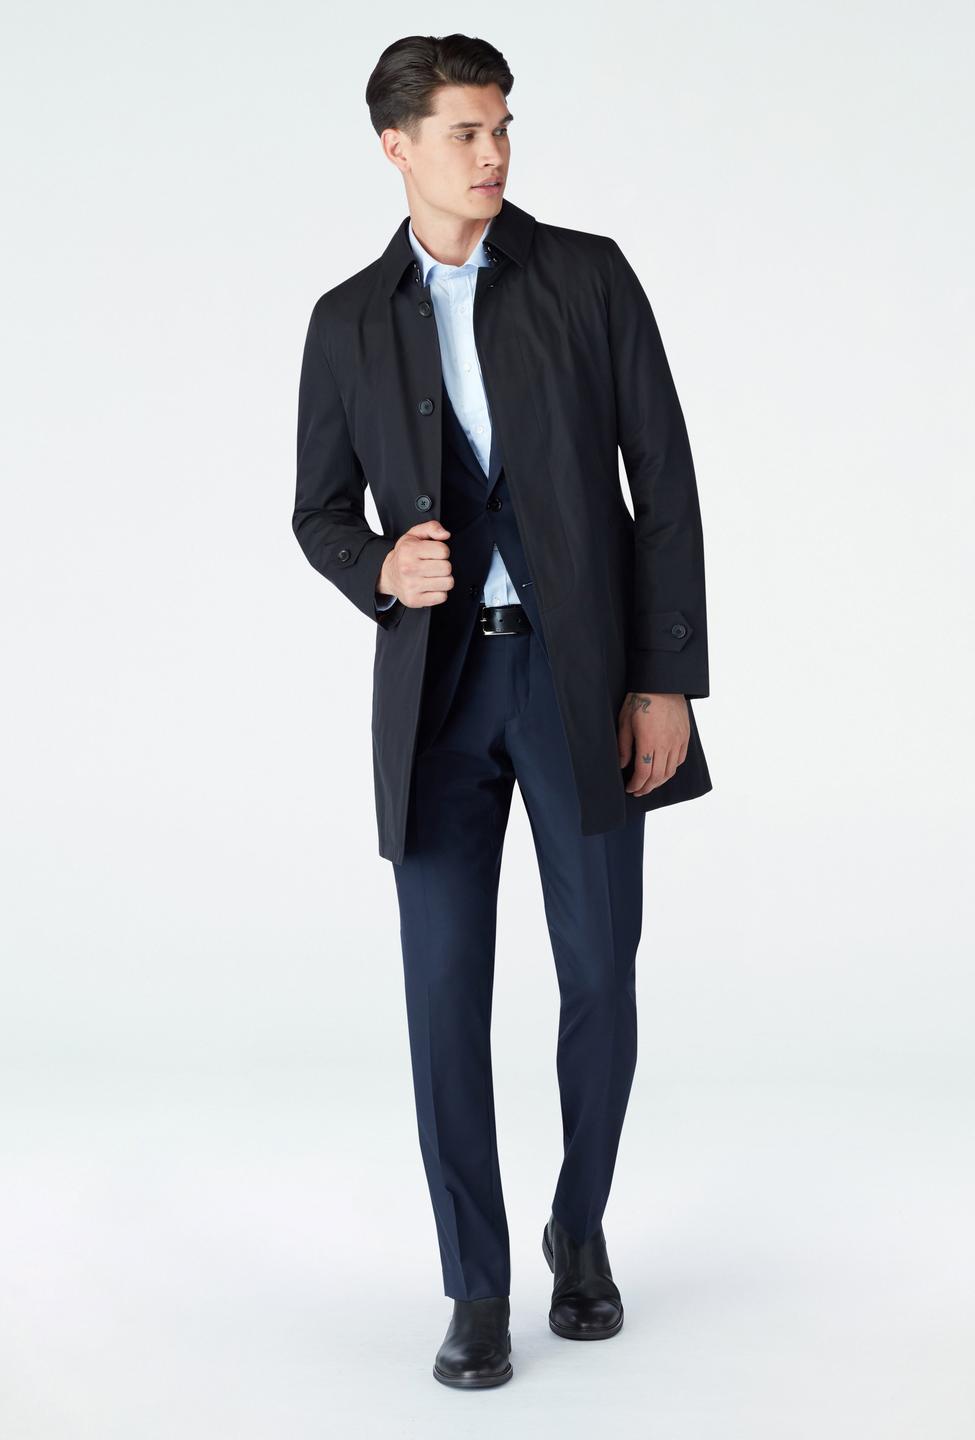 Black trenchcoat - Solid Design from Indochino Collection